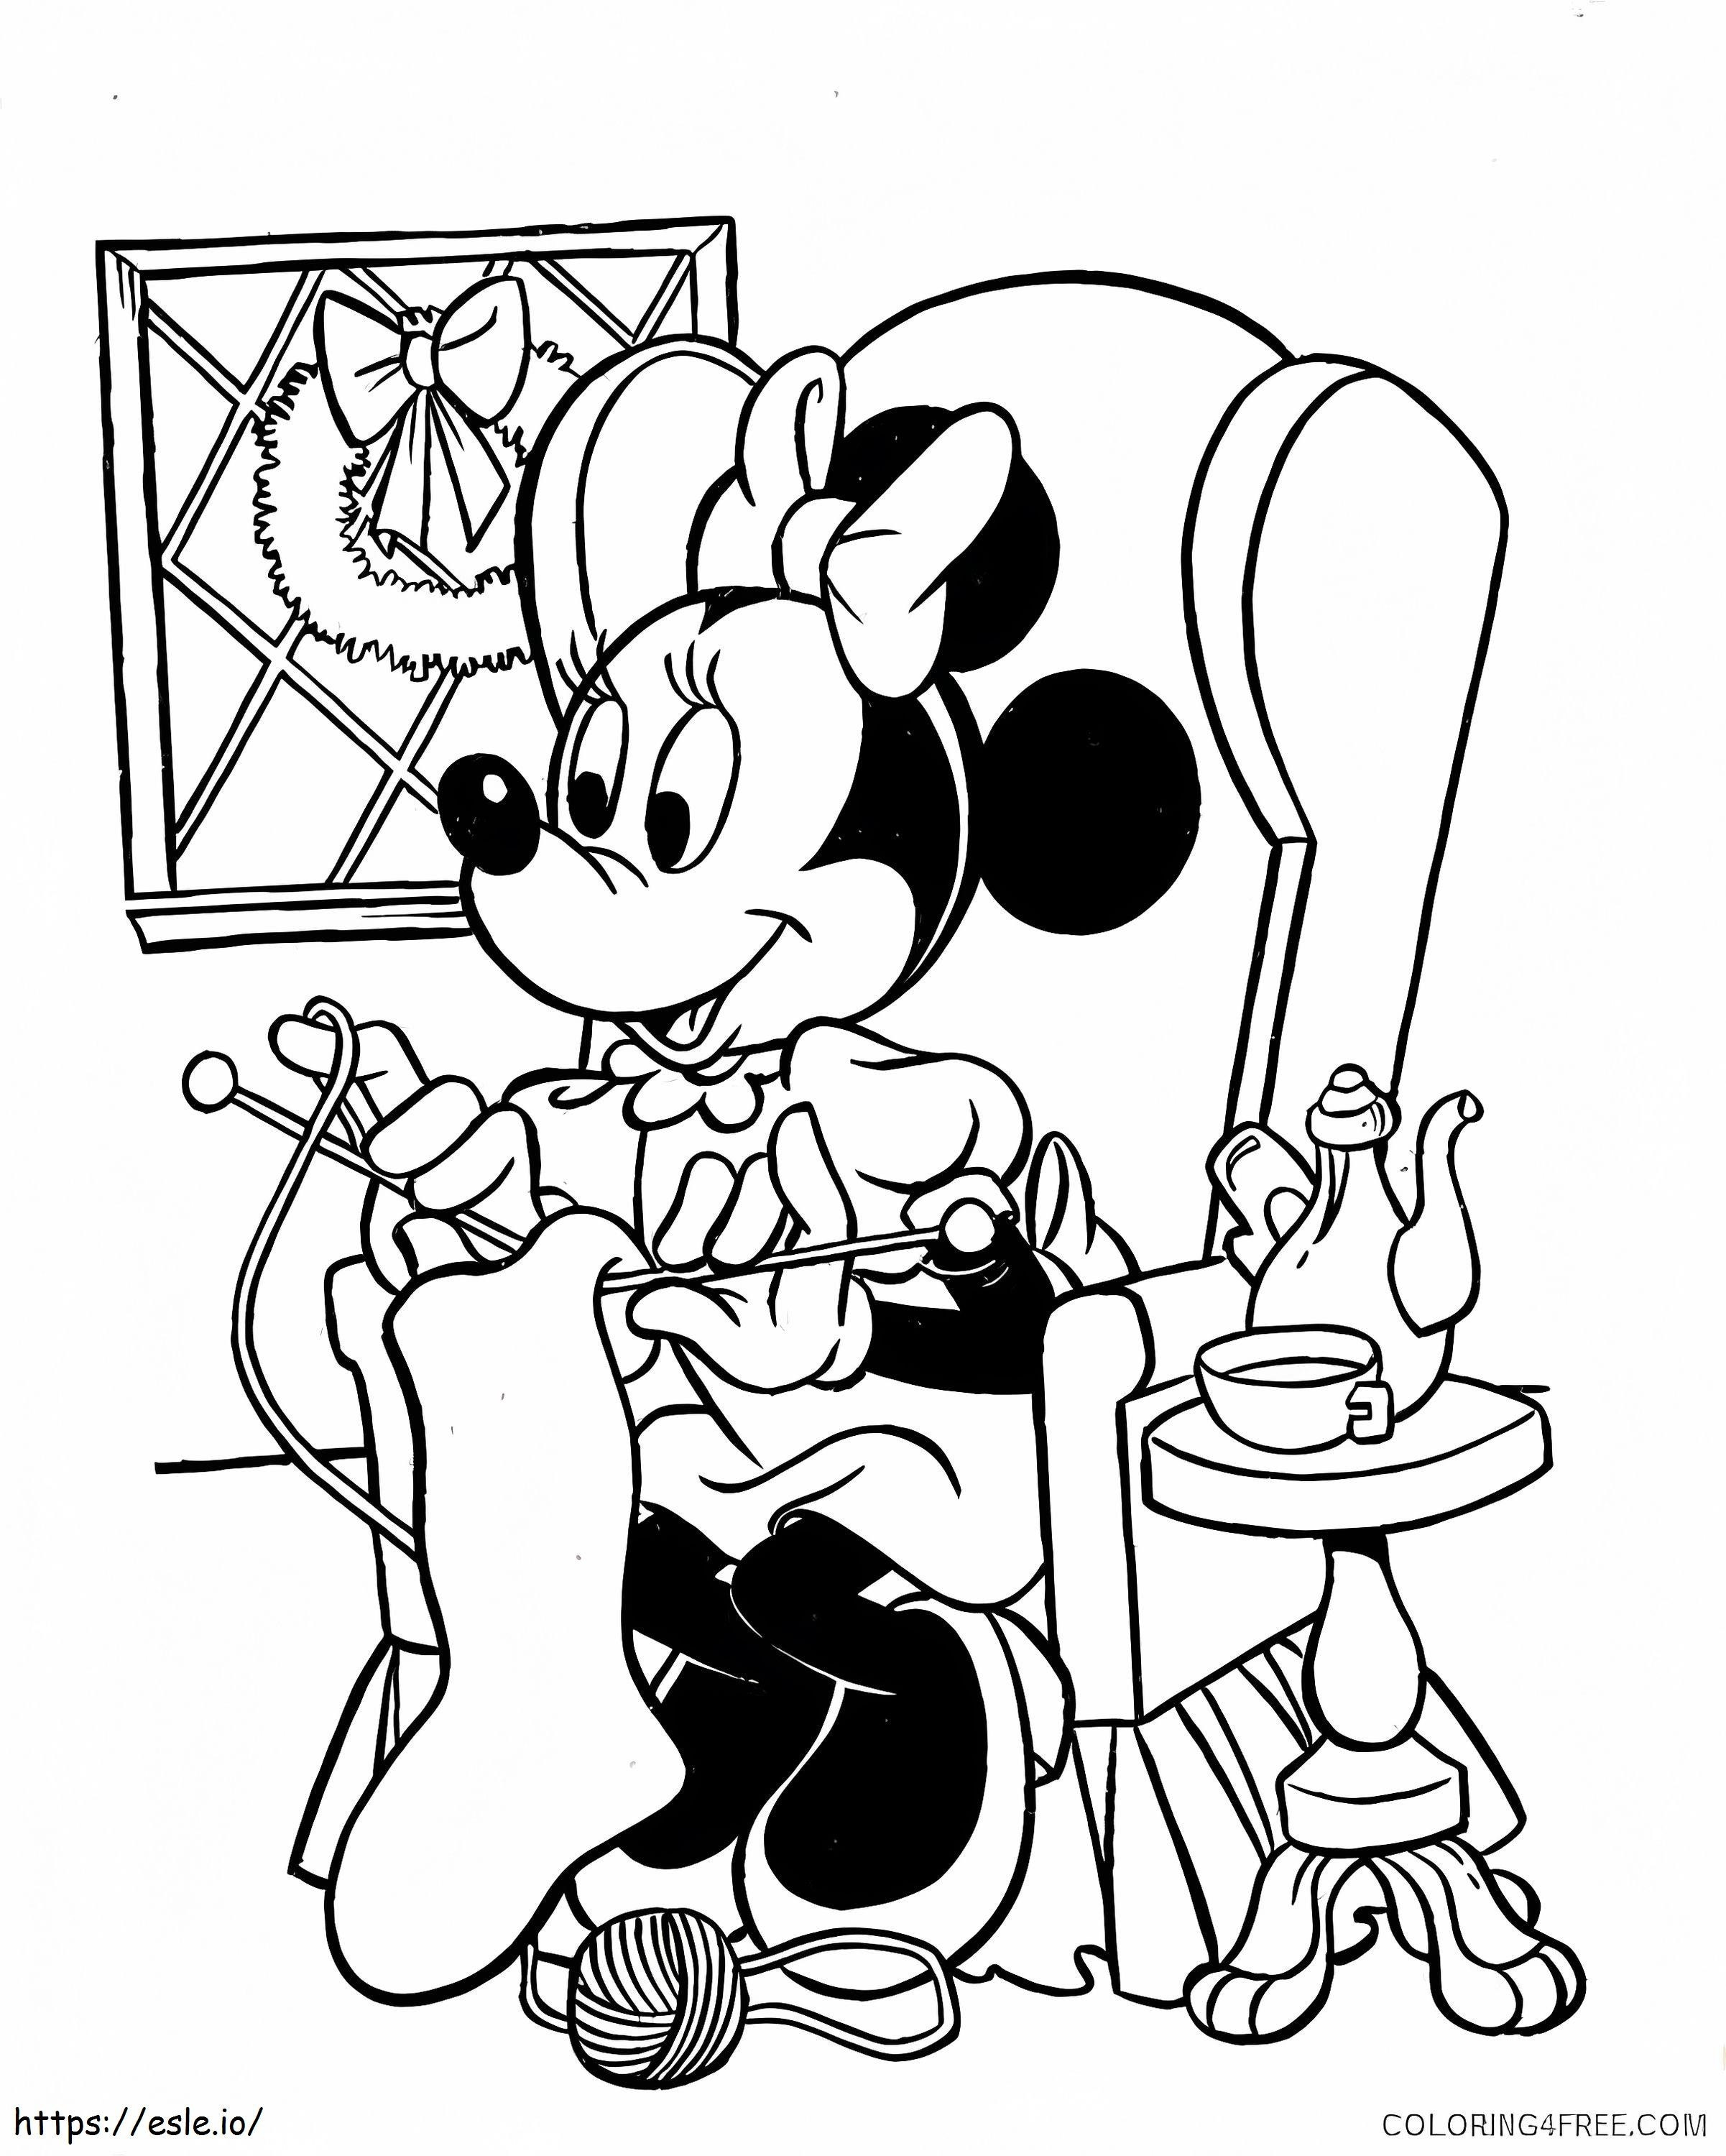 Minnie Mouse 2 coloring page